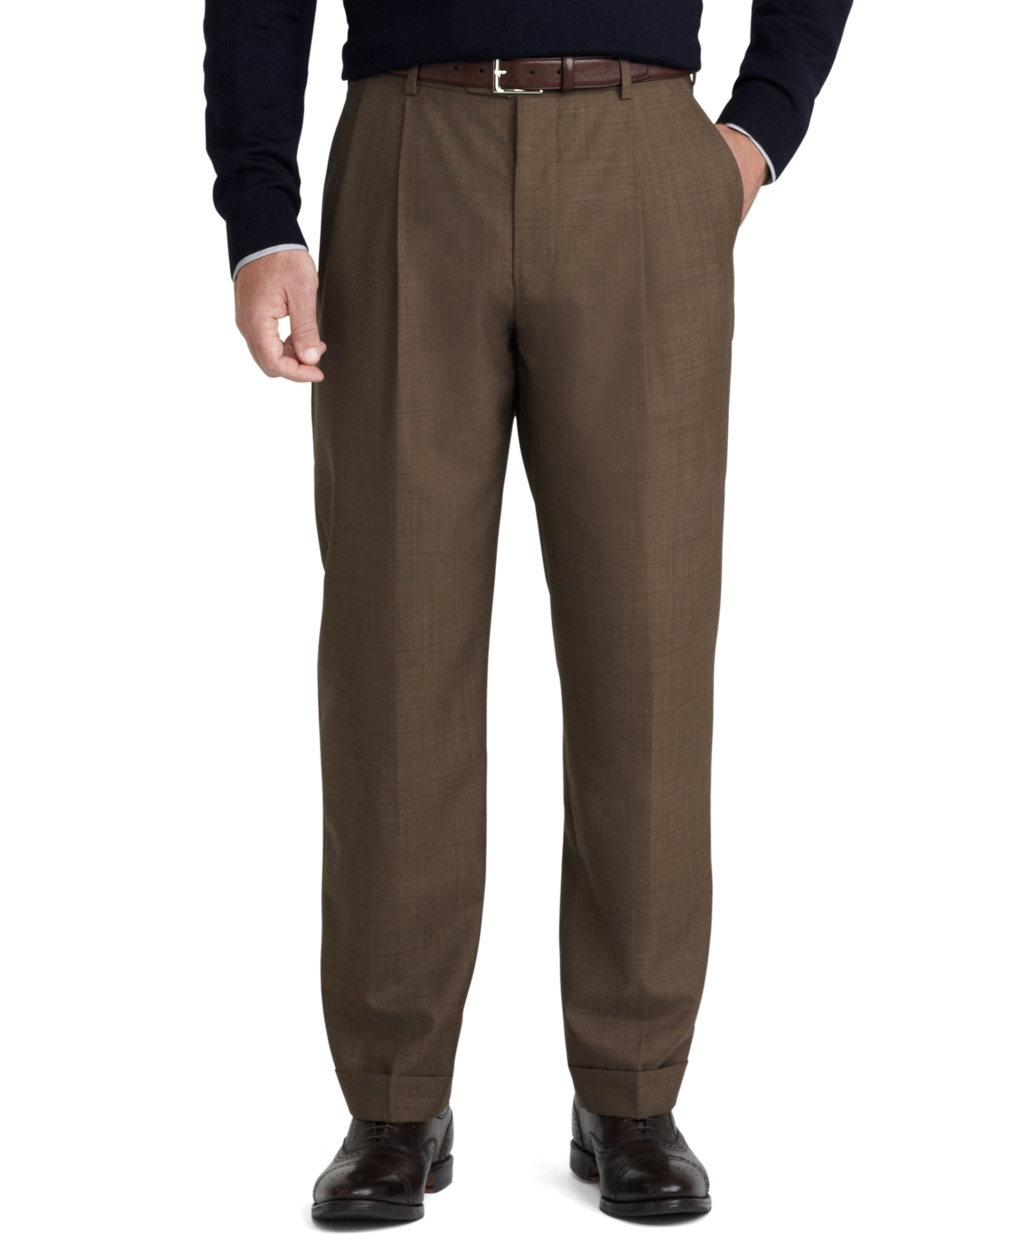 Brooks Brothers Wool Madison Fit Tic Weave Trousers in Brown for Men - Lyst